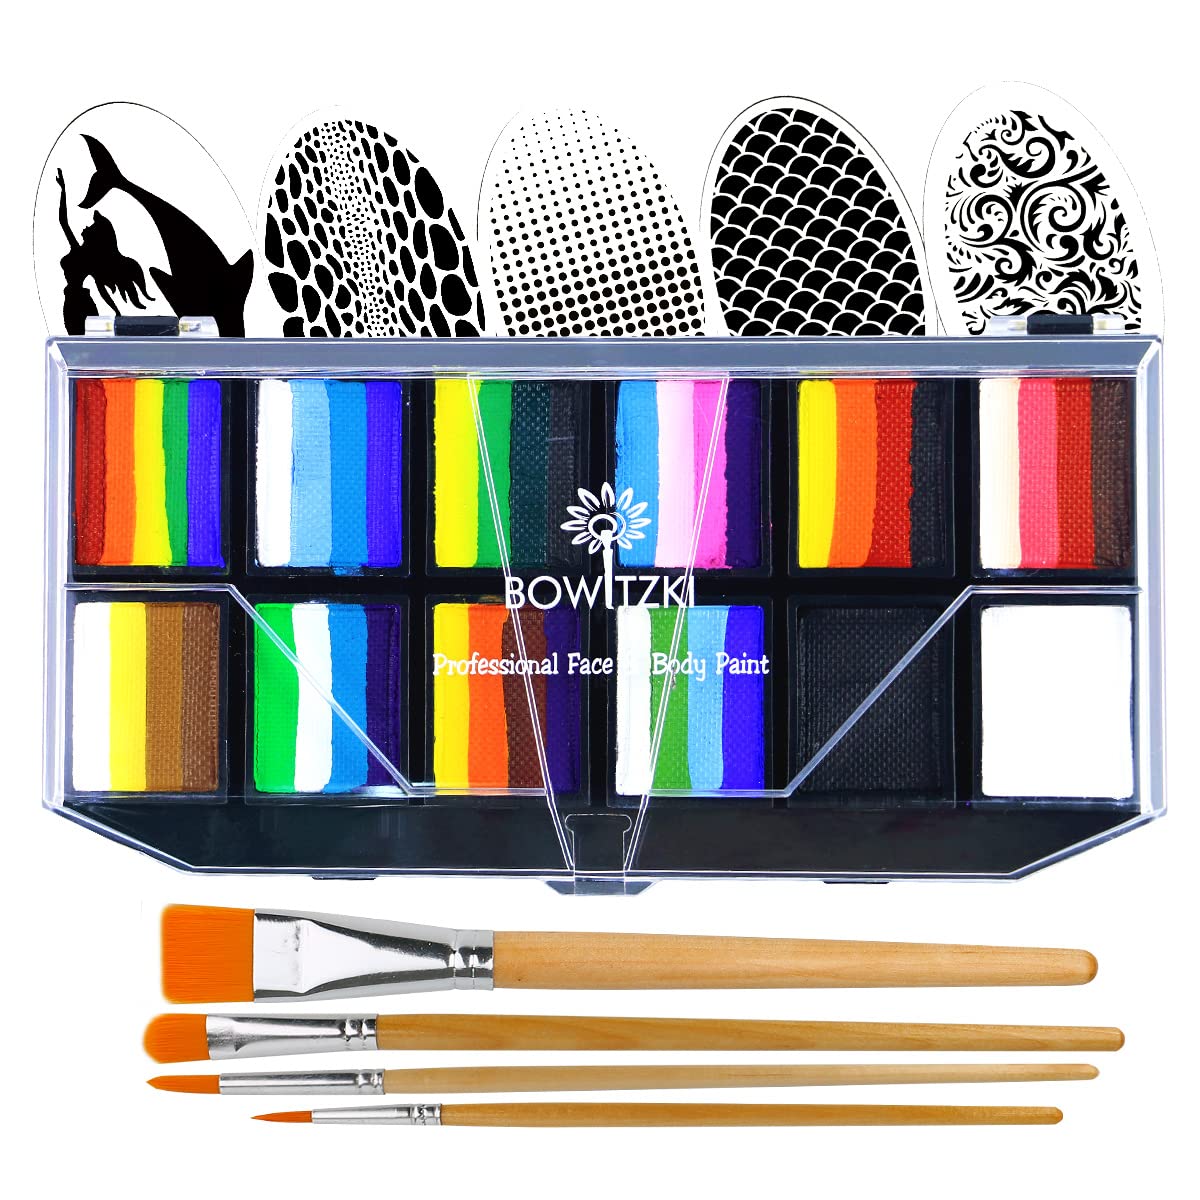 Bowitzki Professional Face Painting Kit For Kids Adults 12x10 gm